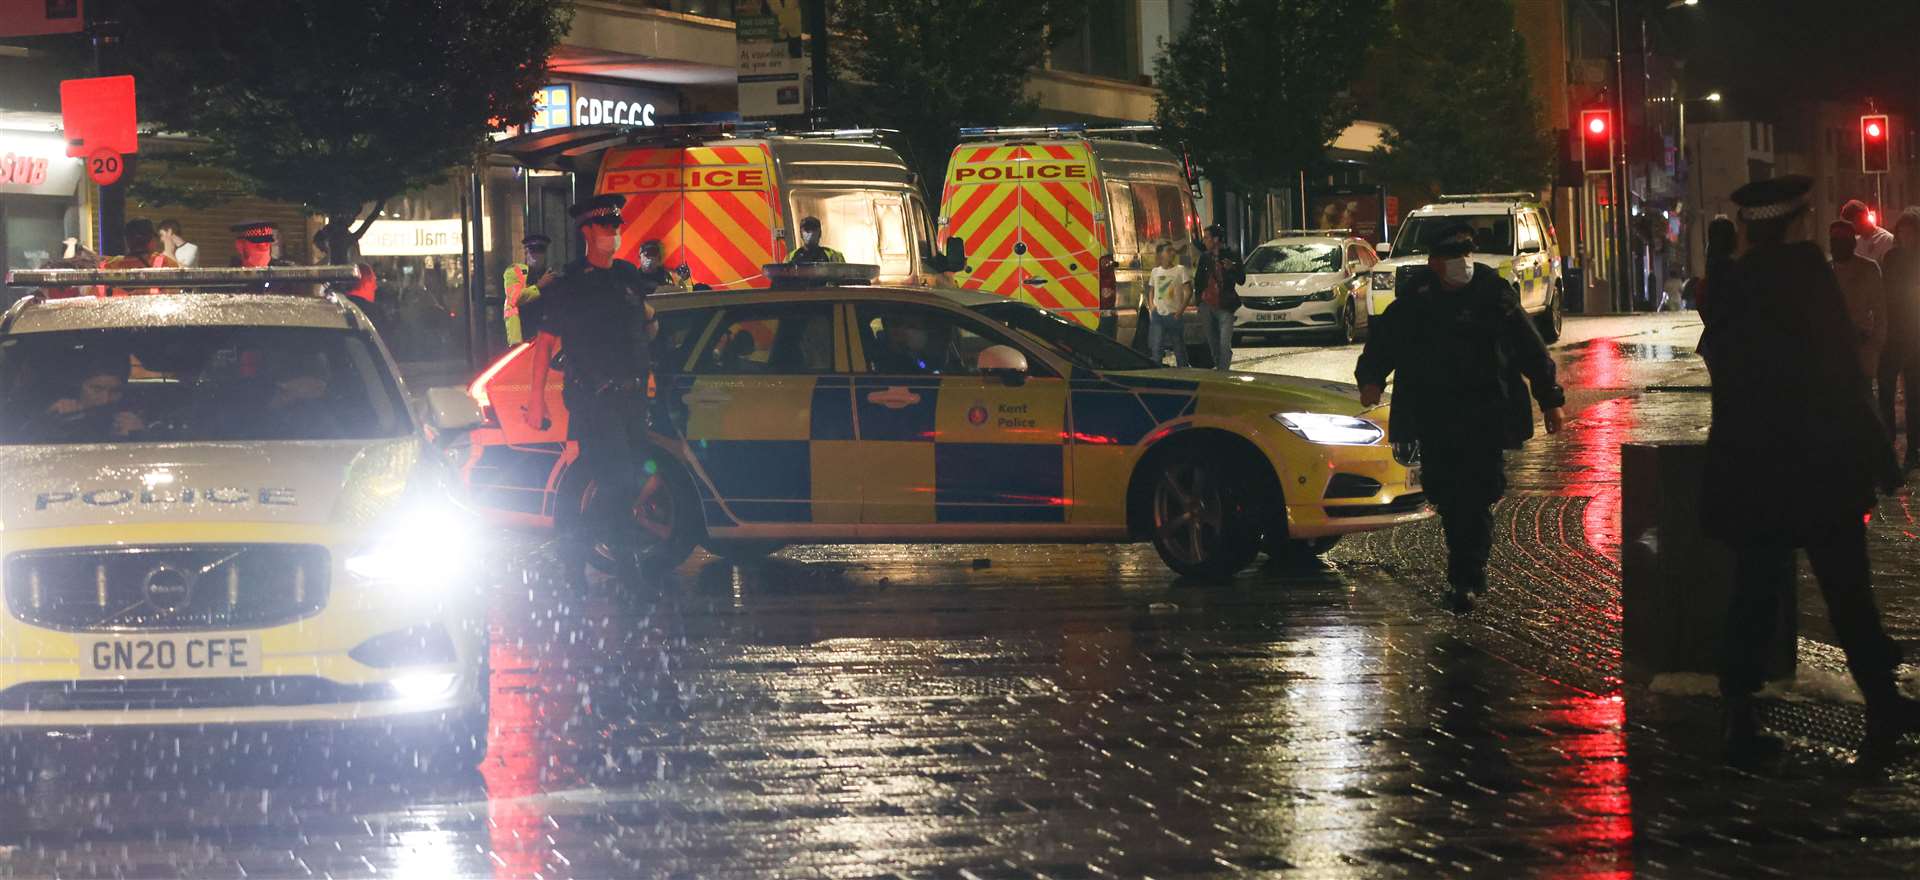 Police in Maidstone town centre Picture: UKNIP